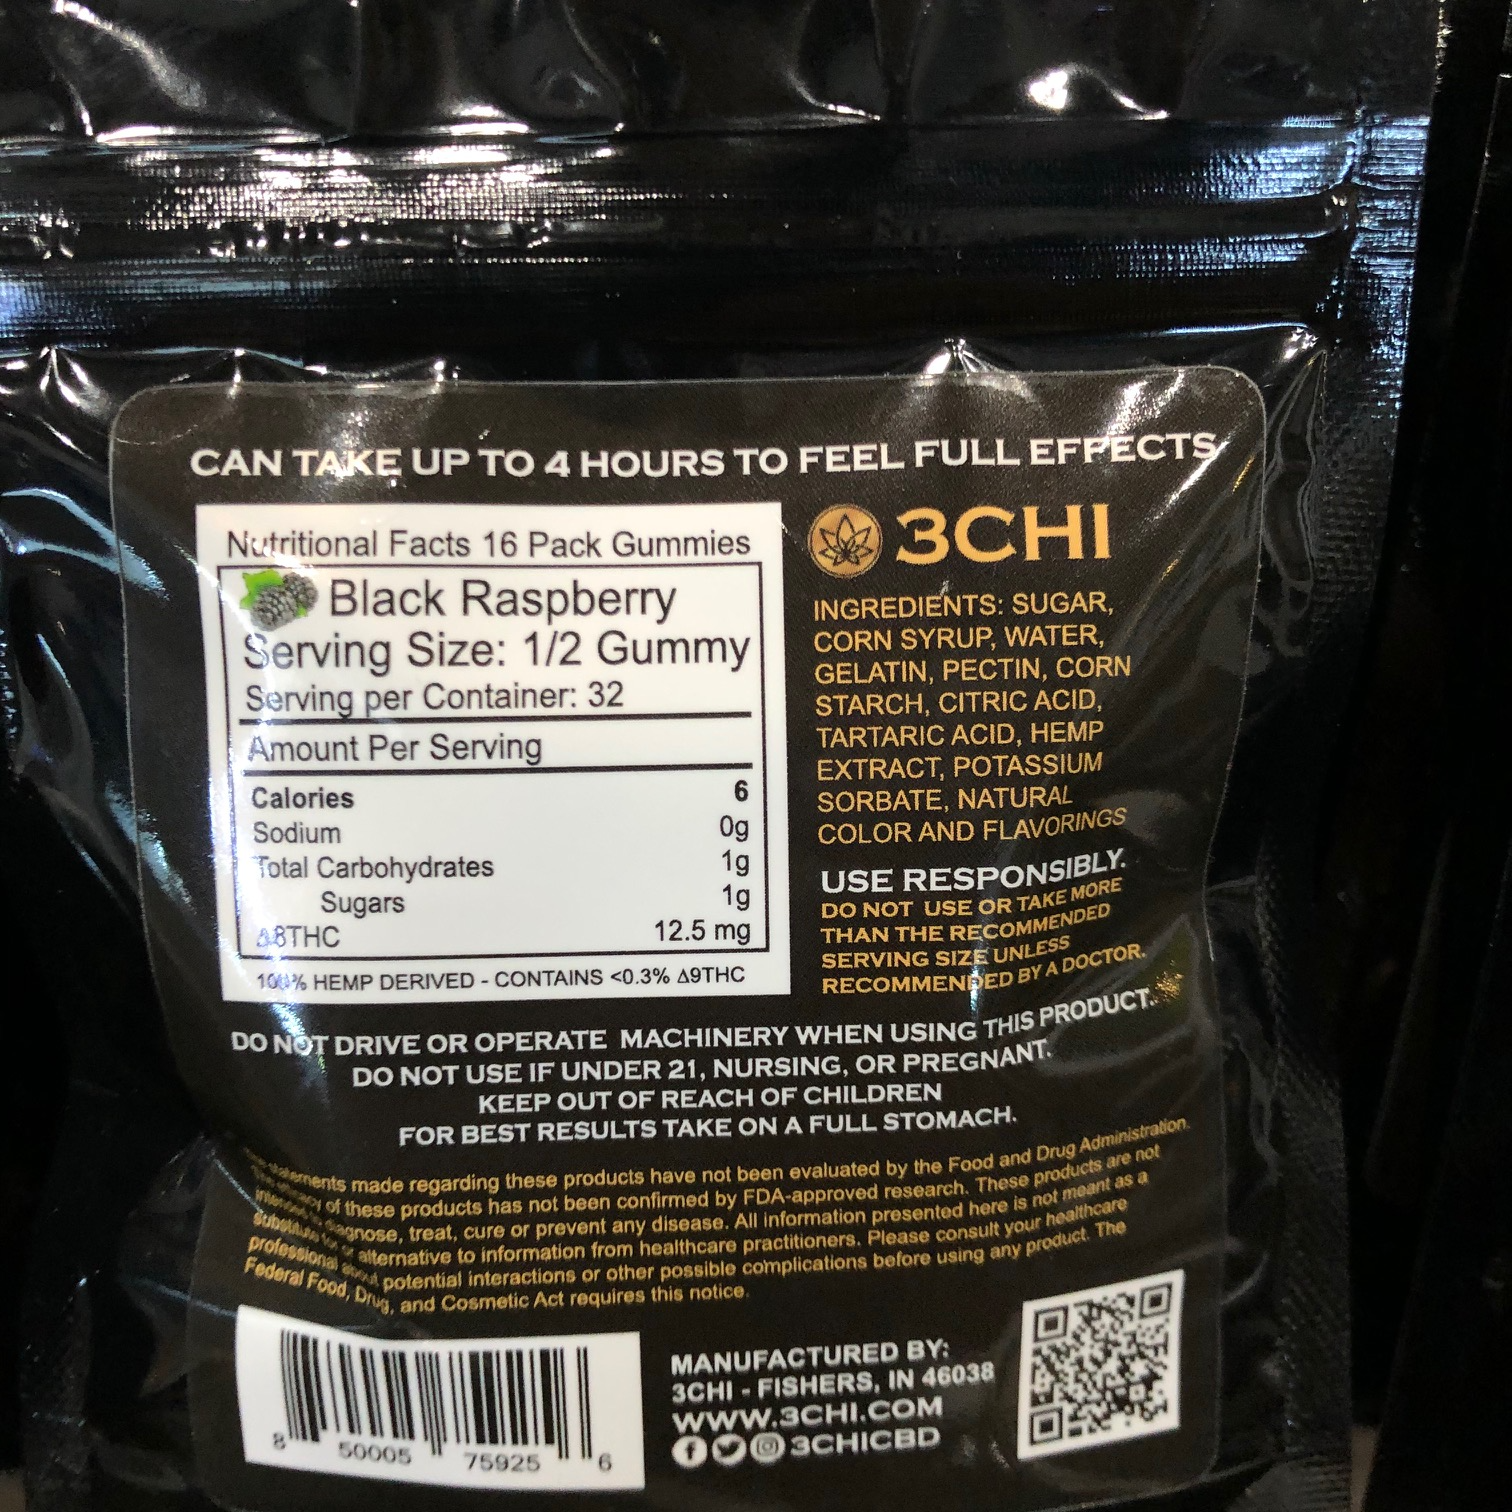 3chi thc delta 8 edibles 25mg 16ct Black Raspberry flavor nutritional facts